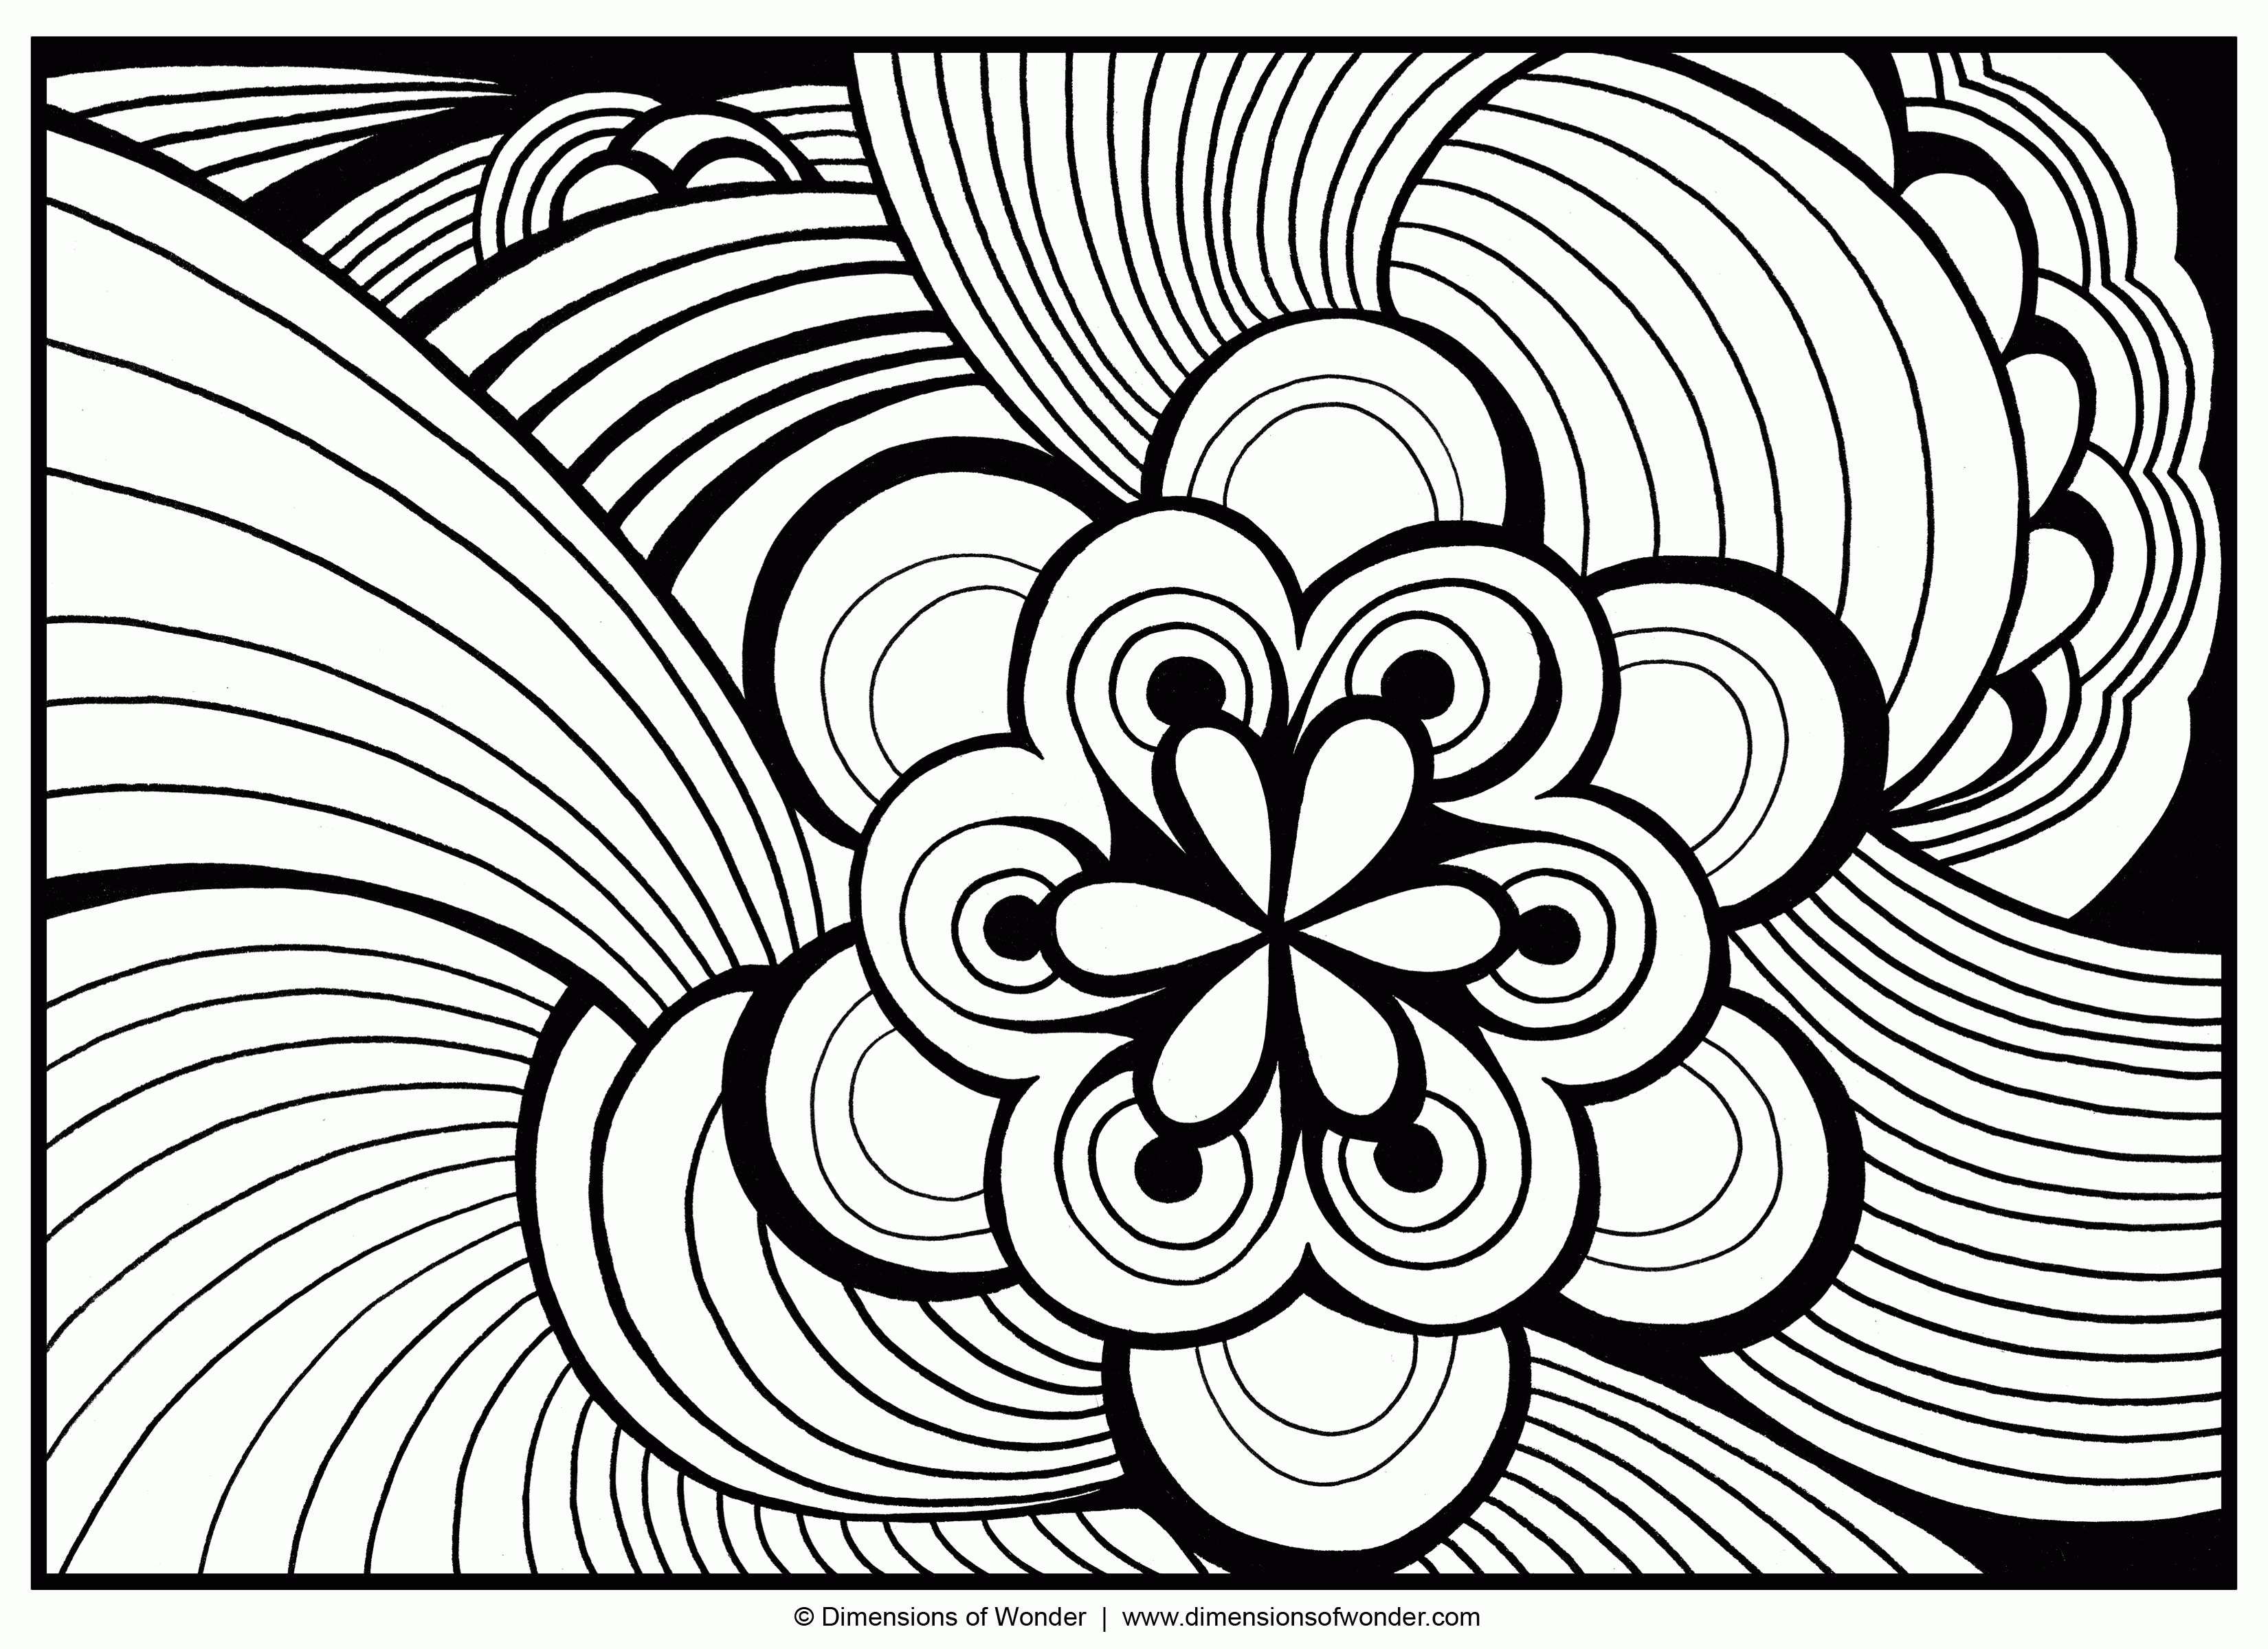 Coloring Pages : Coololoring Pages For Teenagers Free With Designs - Free Printable Coloring Pages For Teens